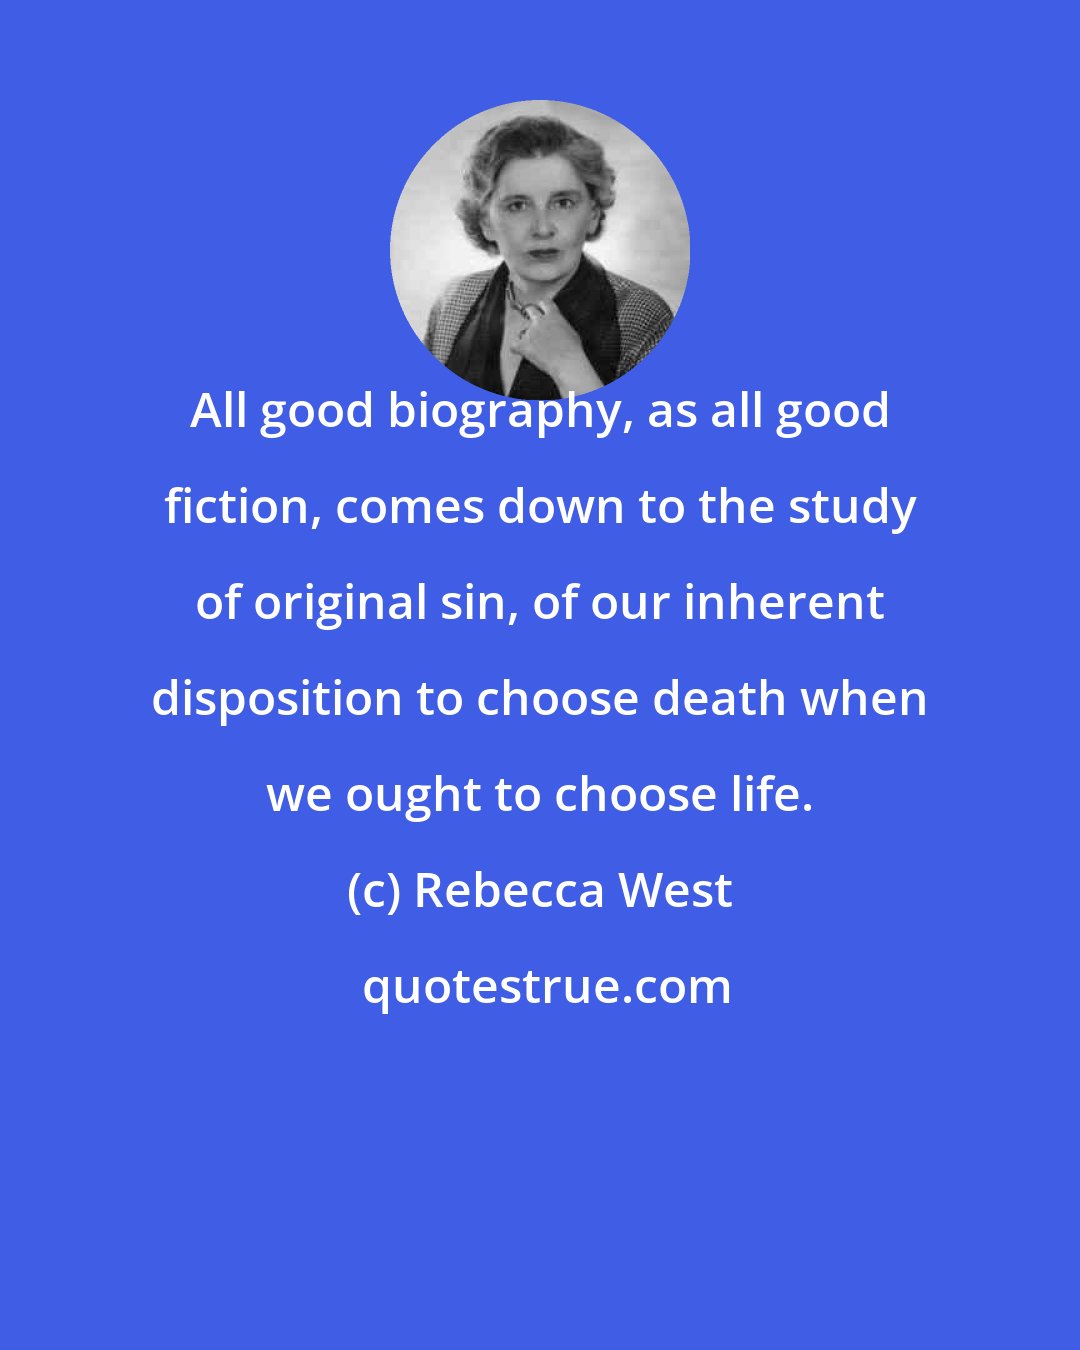 Rebecca West: All good biography, as all good fiction, comes down to the study of original sin, of our inherent disposition to choose death when we ought to choose life.